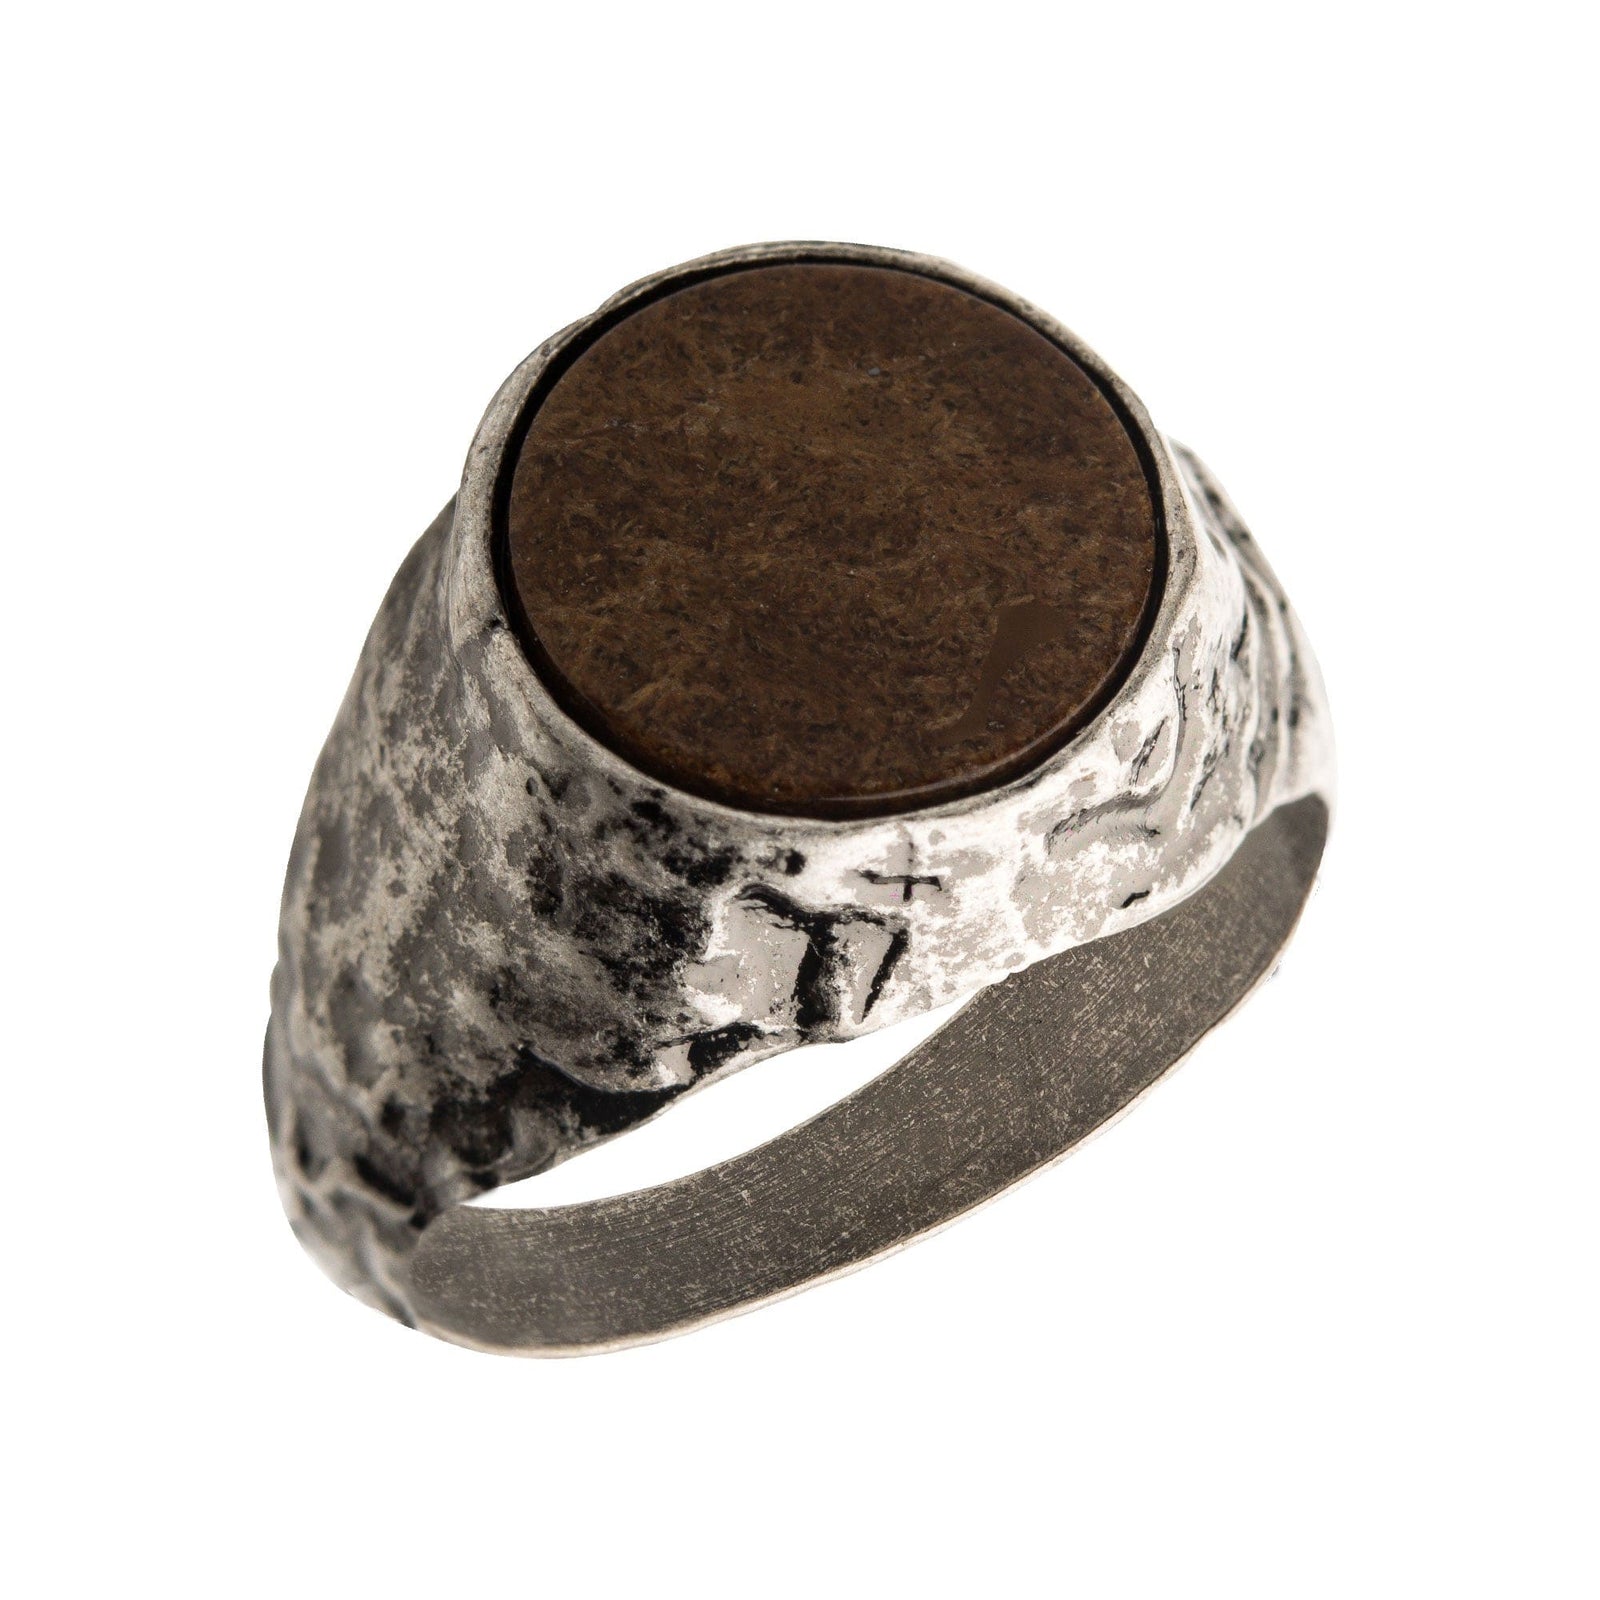 INOX JEWELRY Rings Antiqued Silver Tone Stainless Steel Matte Finish Bronze Ring